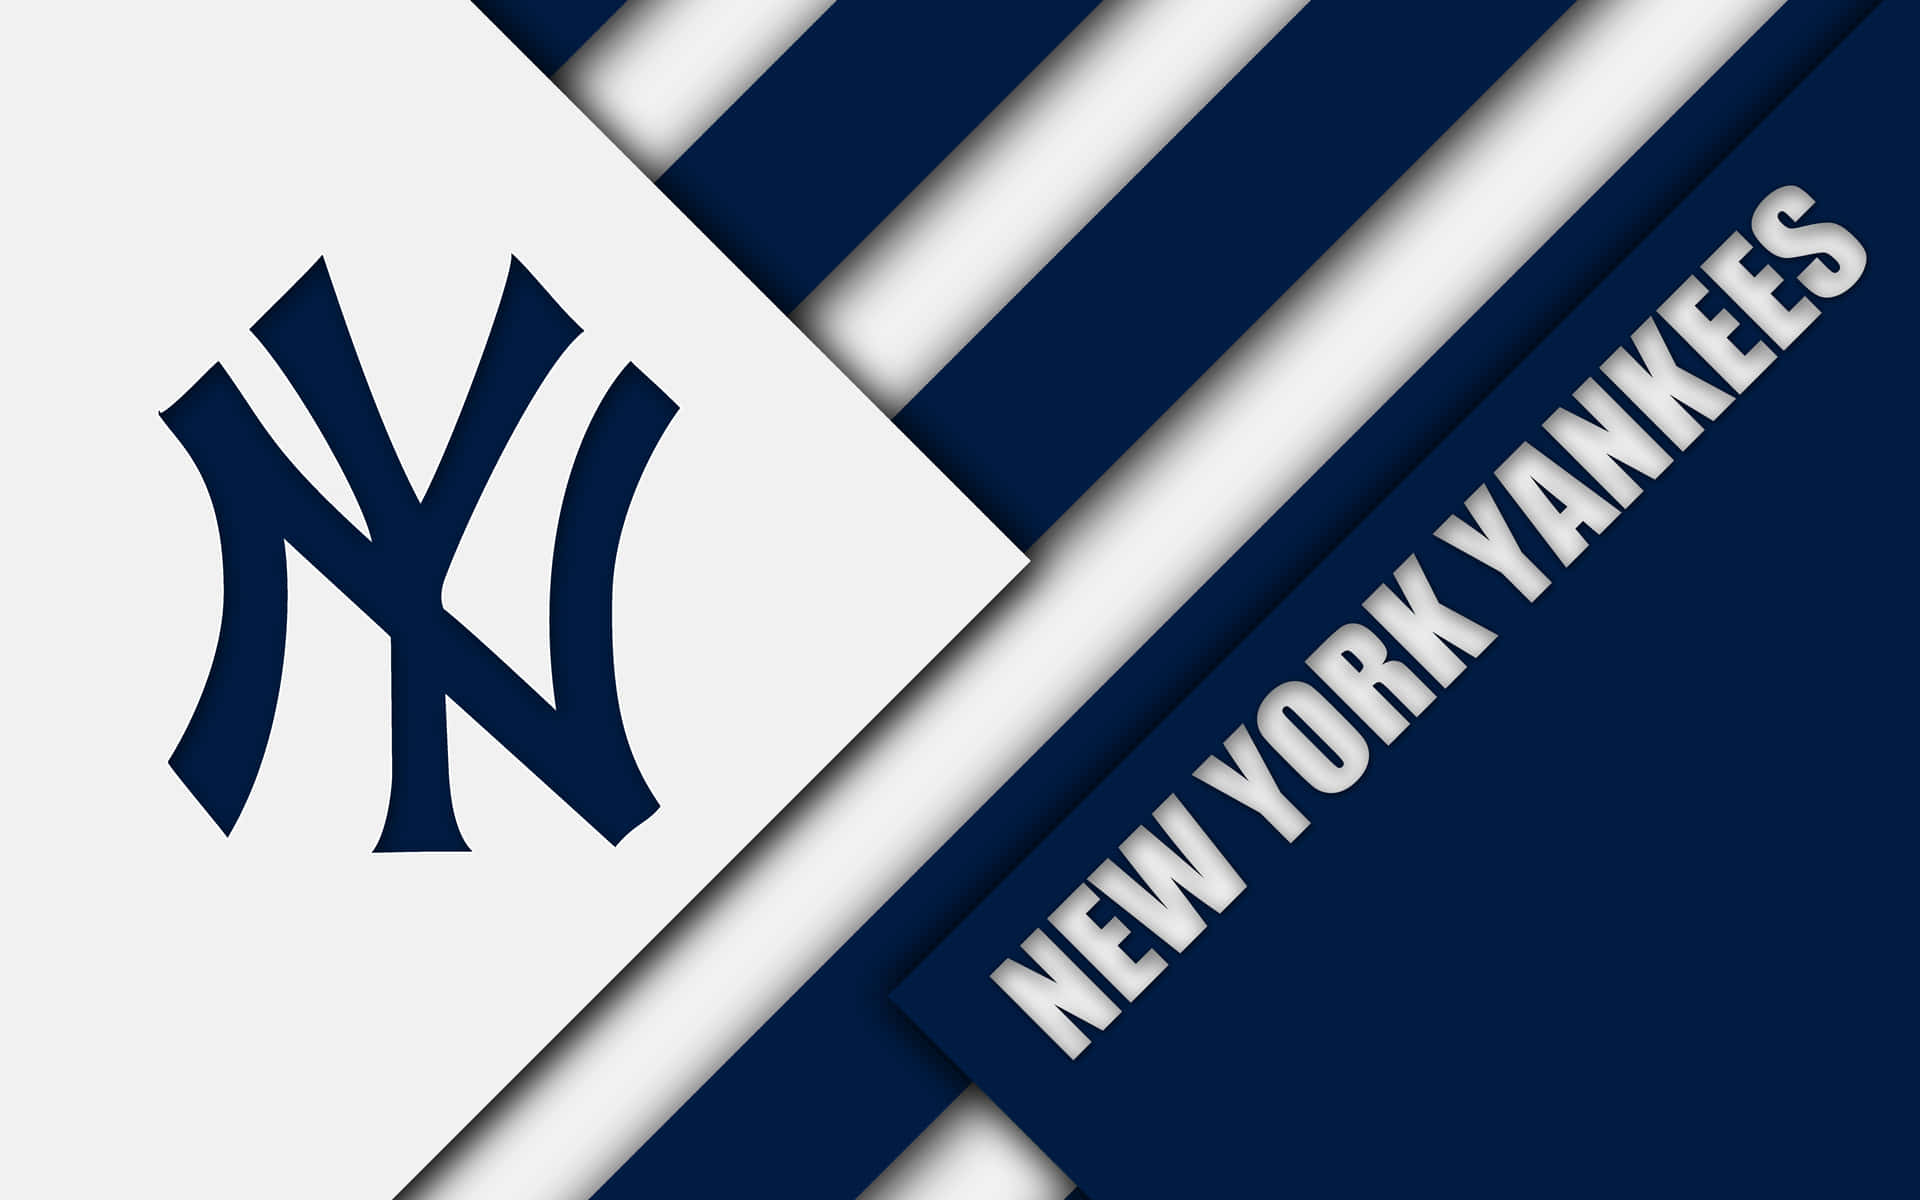 A stunning New York Yankees wallpaper featuring the team's iconic logo